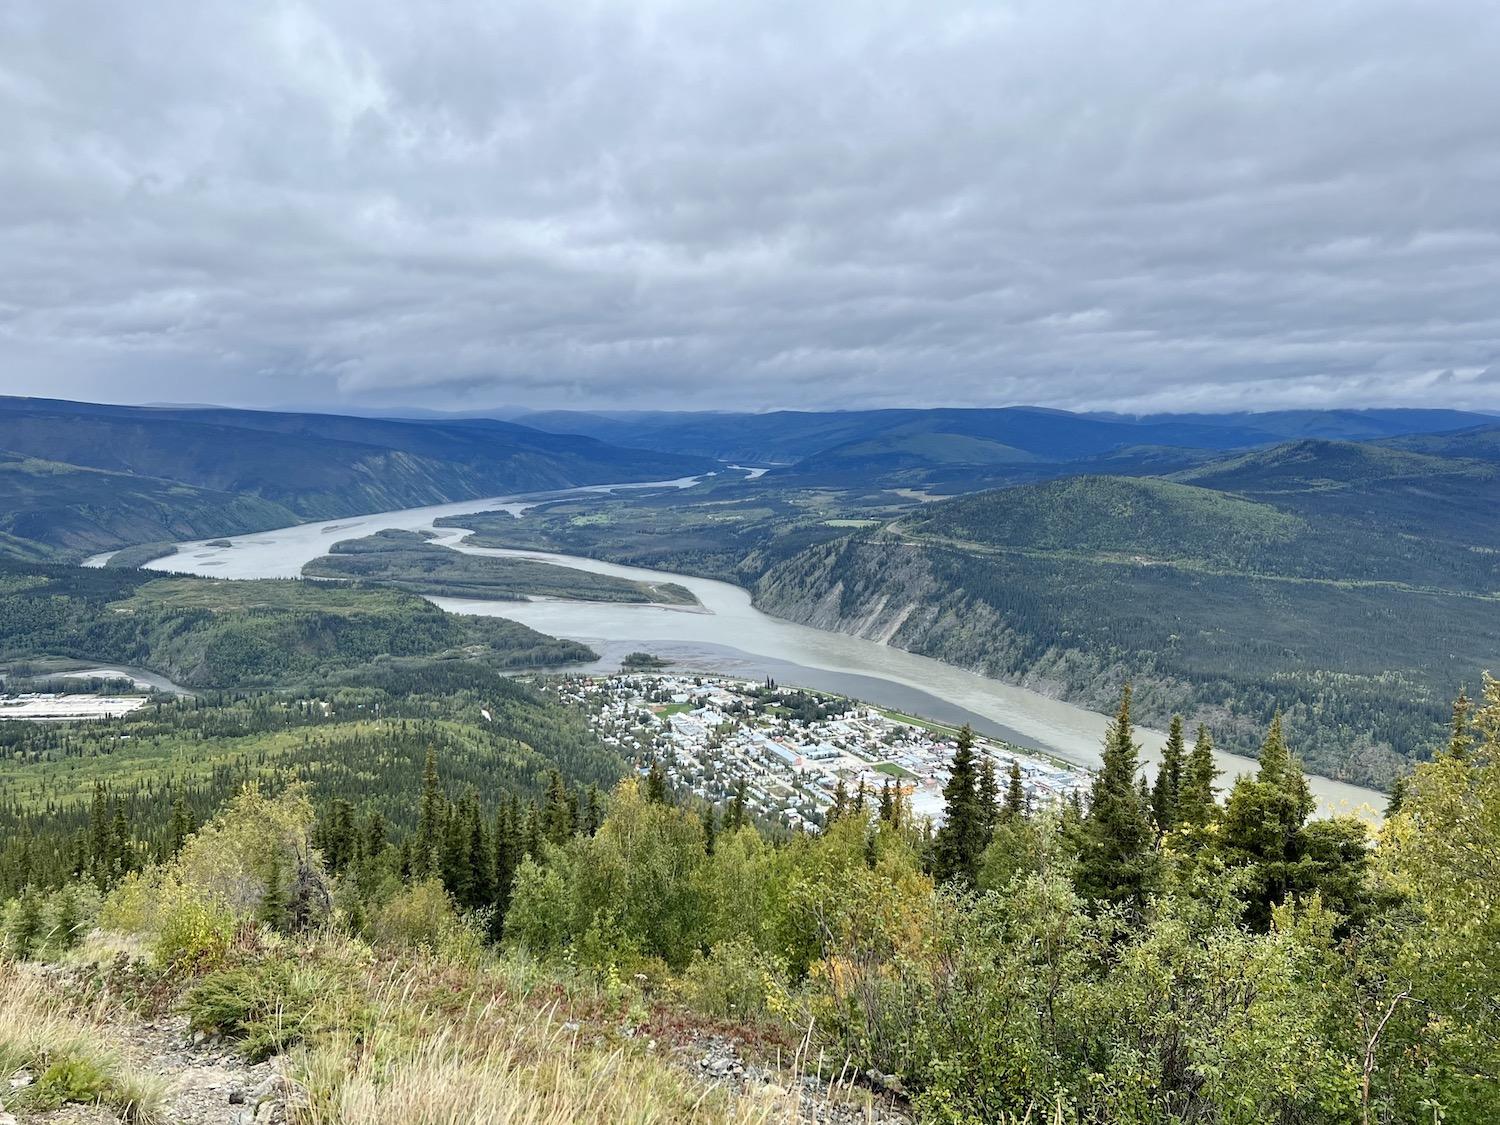 View from the Midnight Dome of Dawson City and the region.